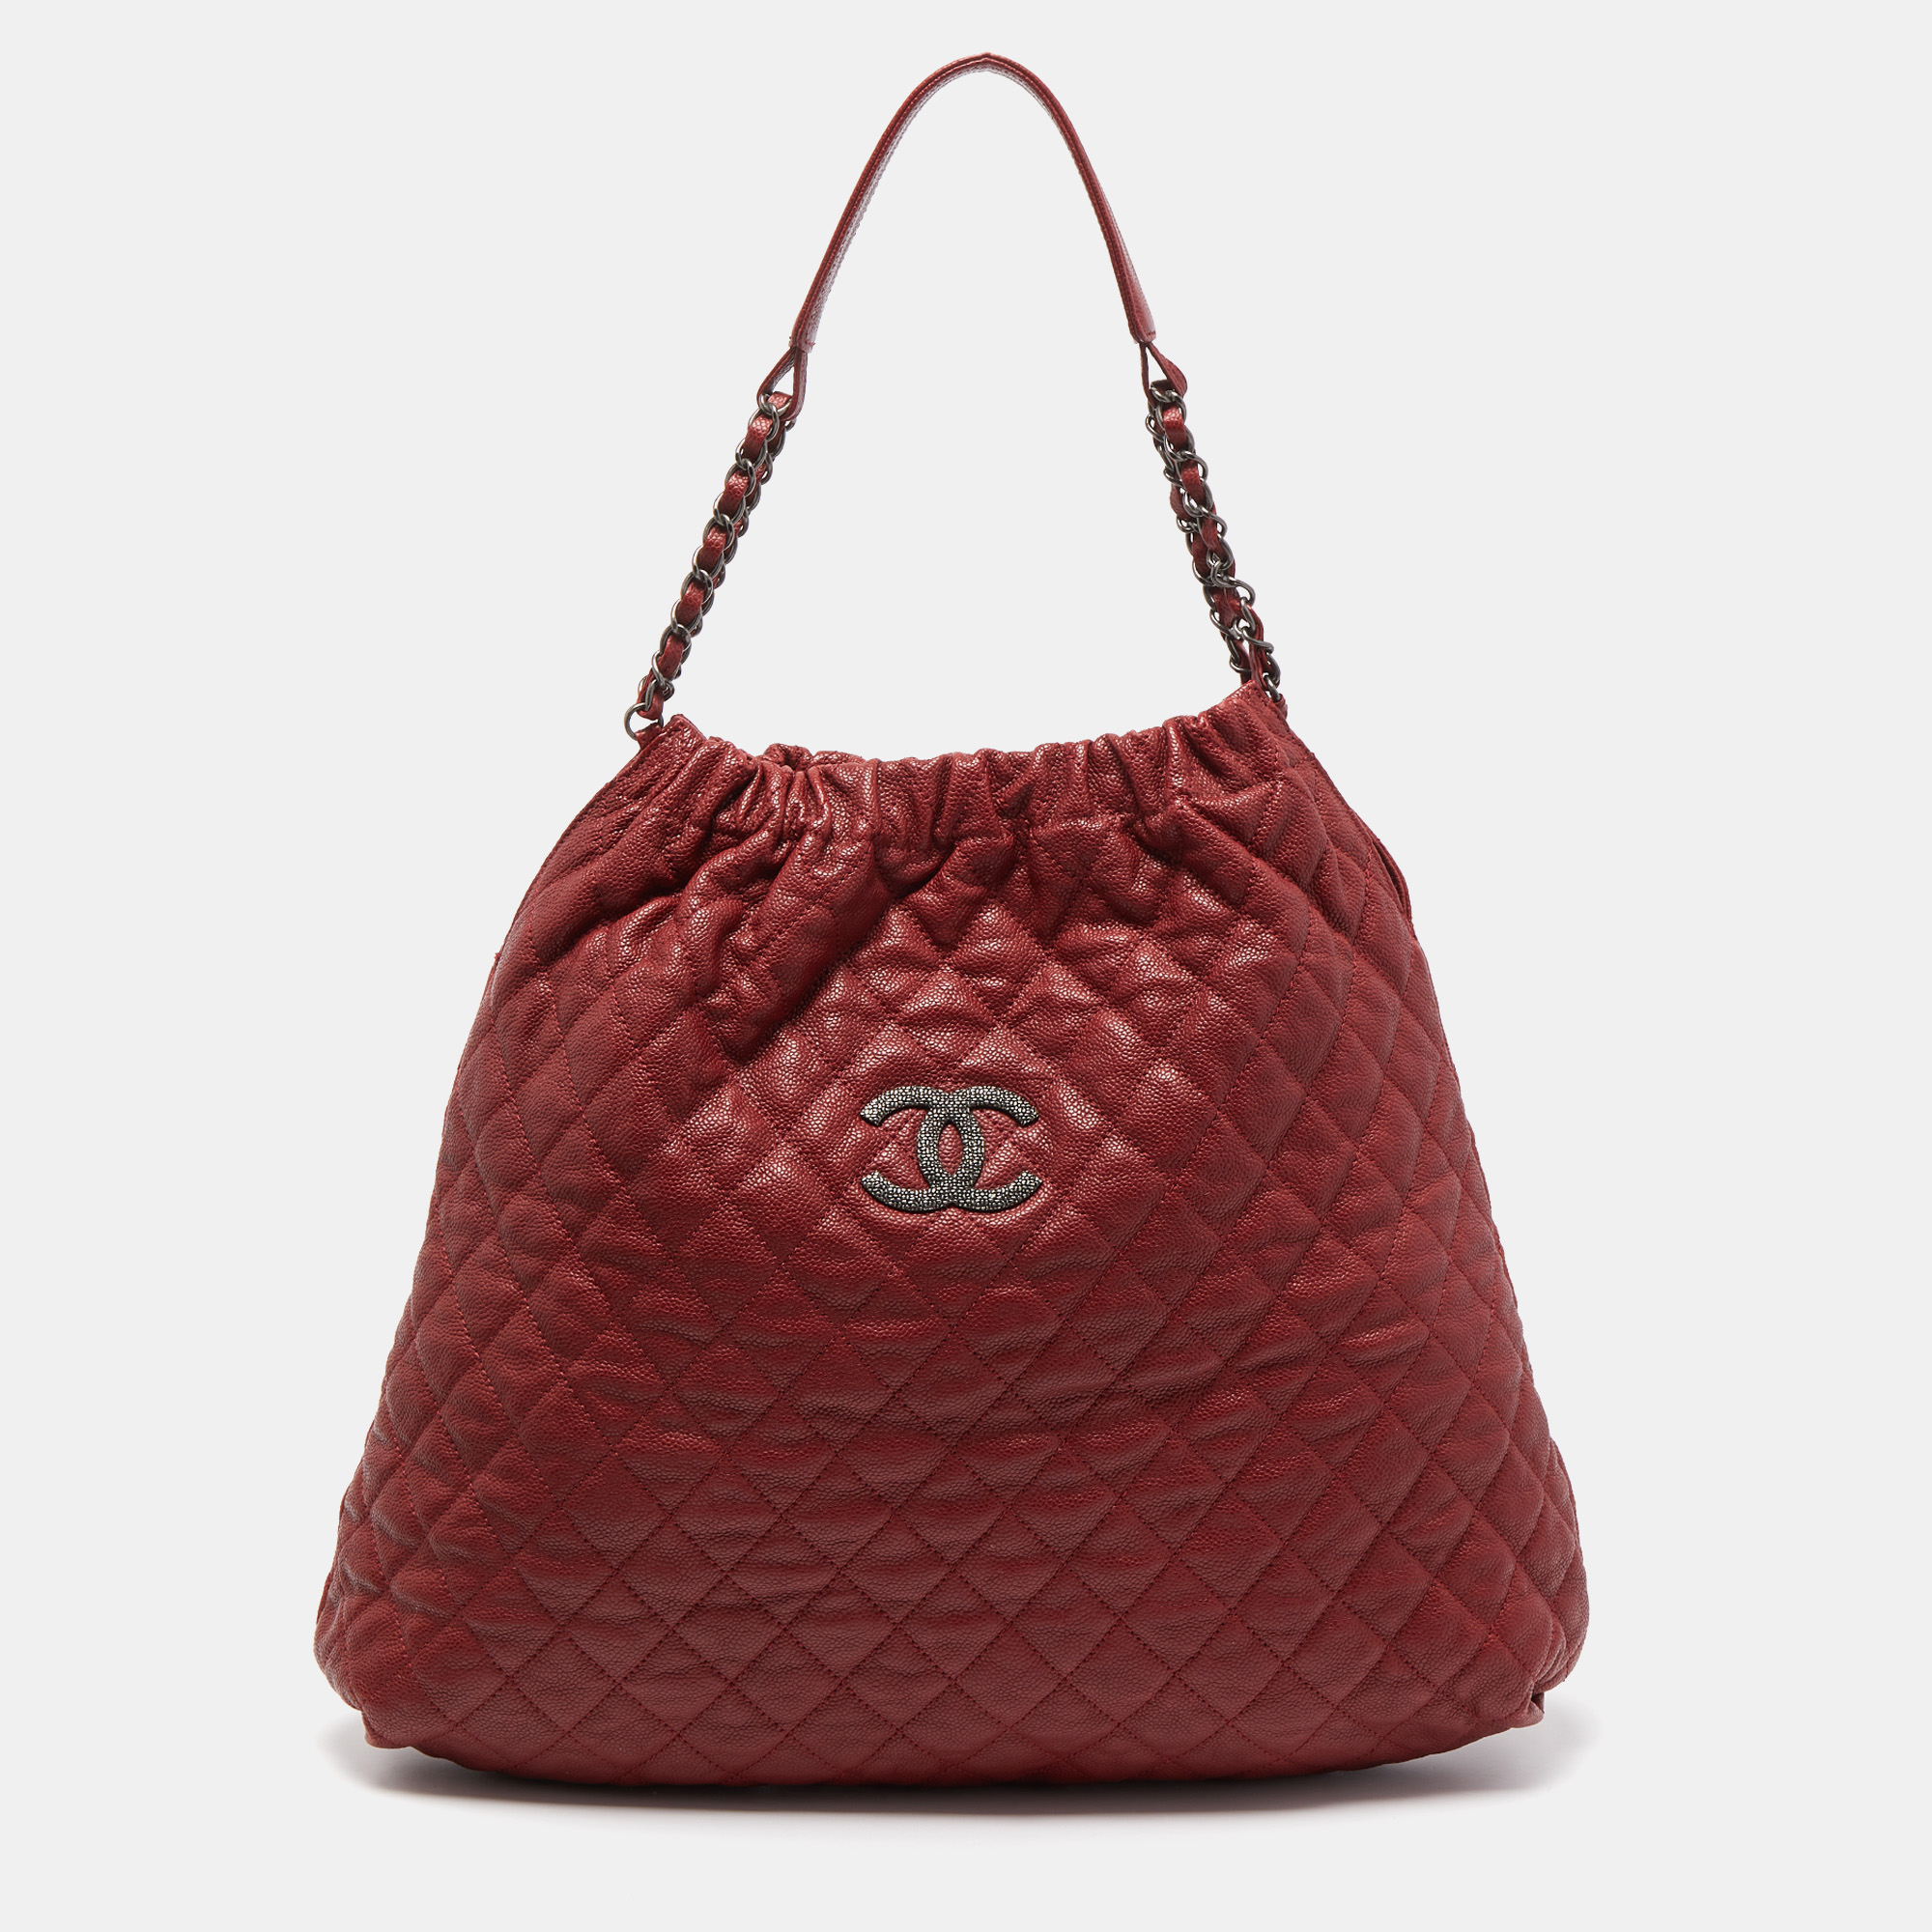 Chanel Red Quilted Caviar Leather CC Drawstring Hobo